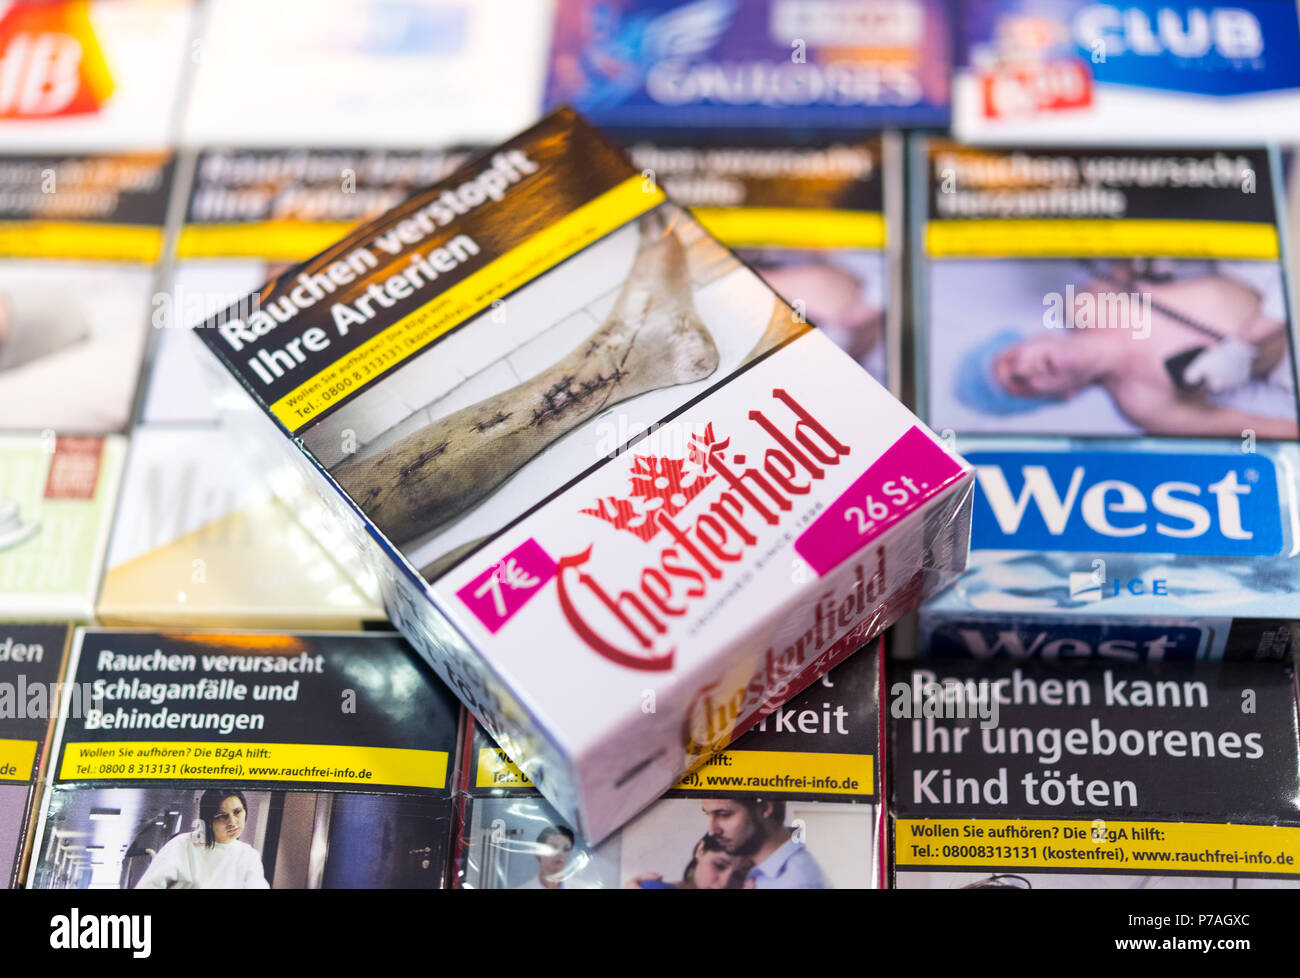 ILLUSTRATION - 4 July 2018, Dresden, Germany: Cigarette boxes with shock imagery printed on them can be seen on stores shelves. Do pictures of decaying teeth and black lungs have to be exhibited at the sales shelves in supermarkets? The Bavarian Association 'Pro Rauchfrei' (lit. 'Pro Smoke Free') has answered affirmatively and is currently sueing. The 5th of July will see the sentencing at the district court in Munich. Photo: Monika Skolimowska/dpa-Zentralbild/dpa Stock Photo